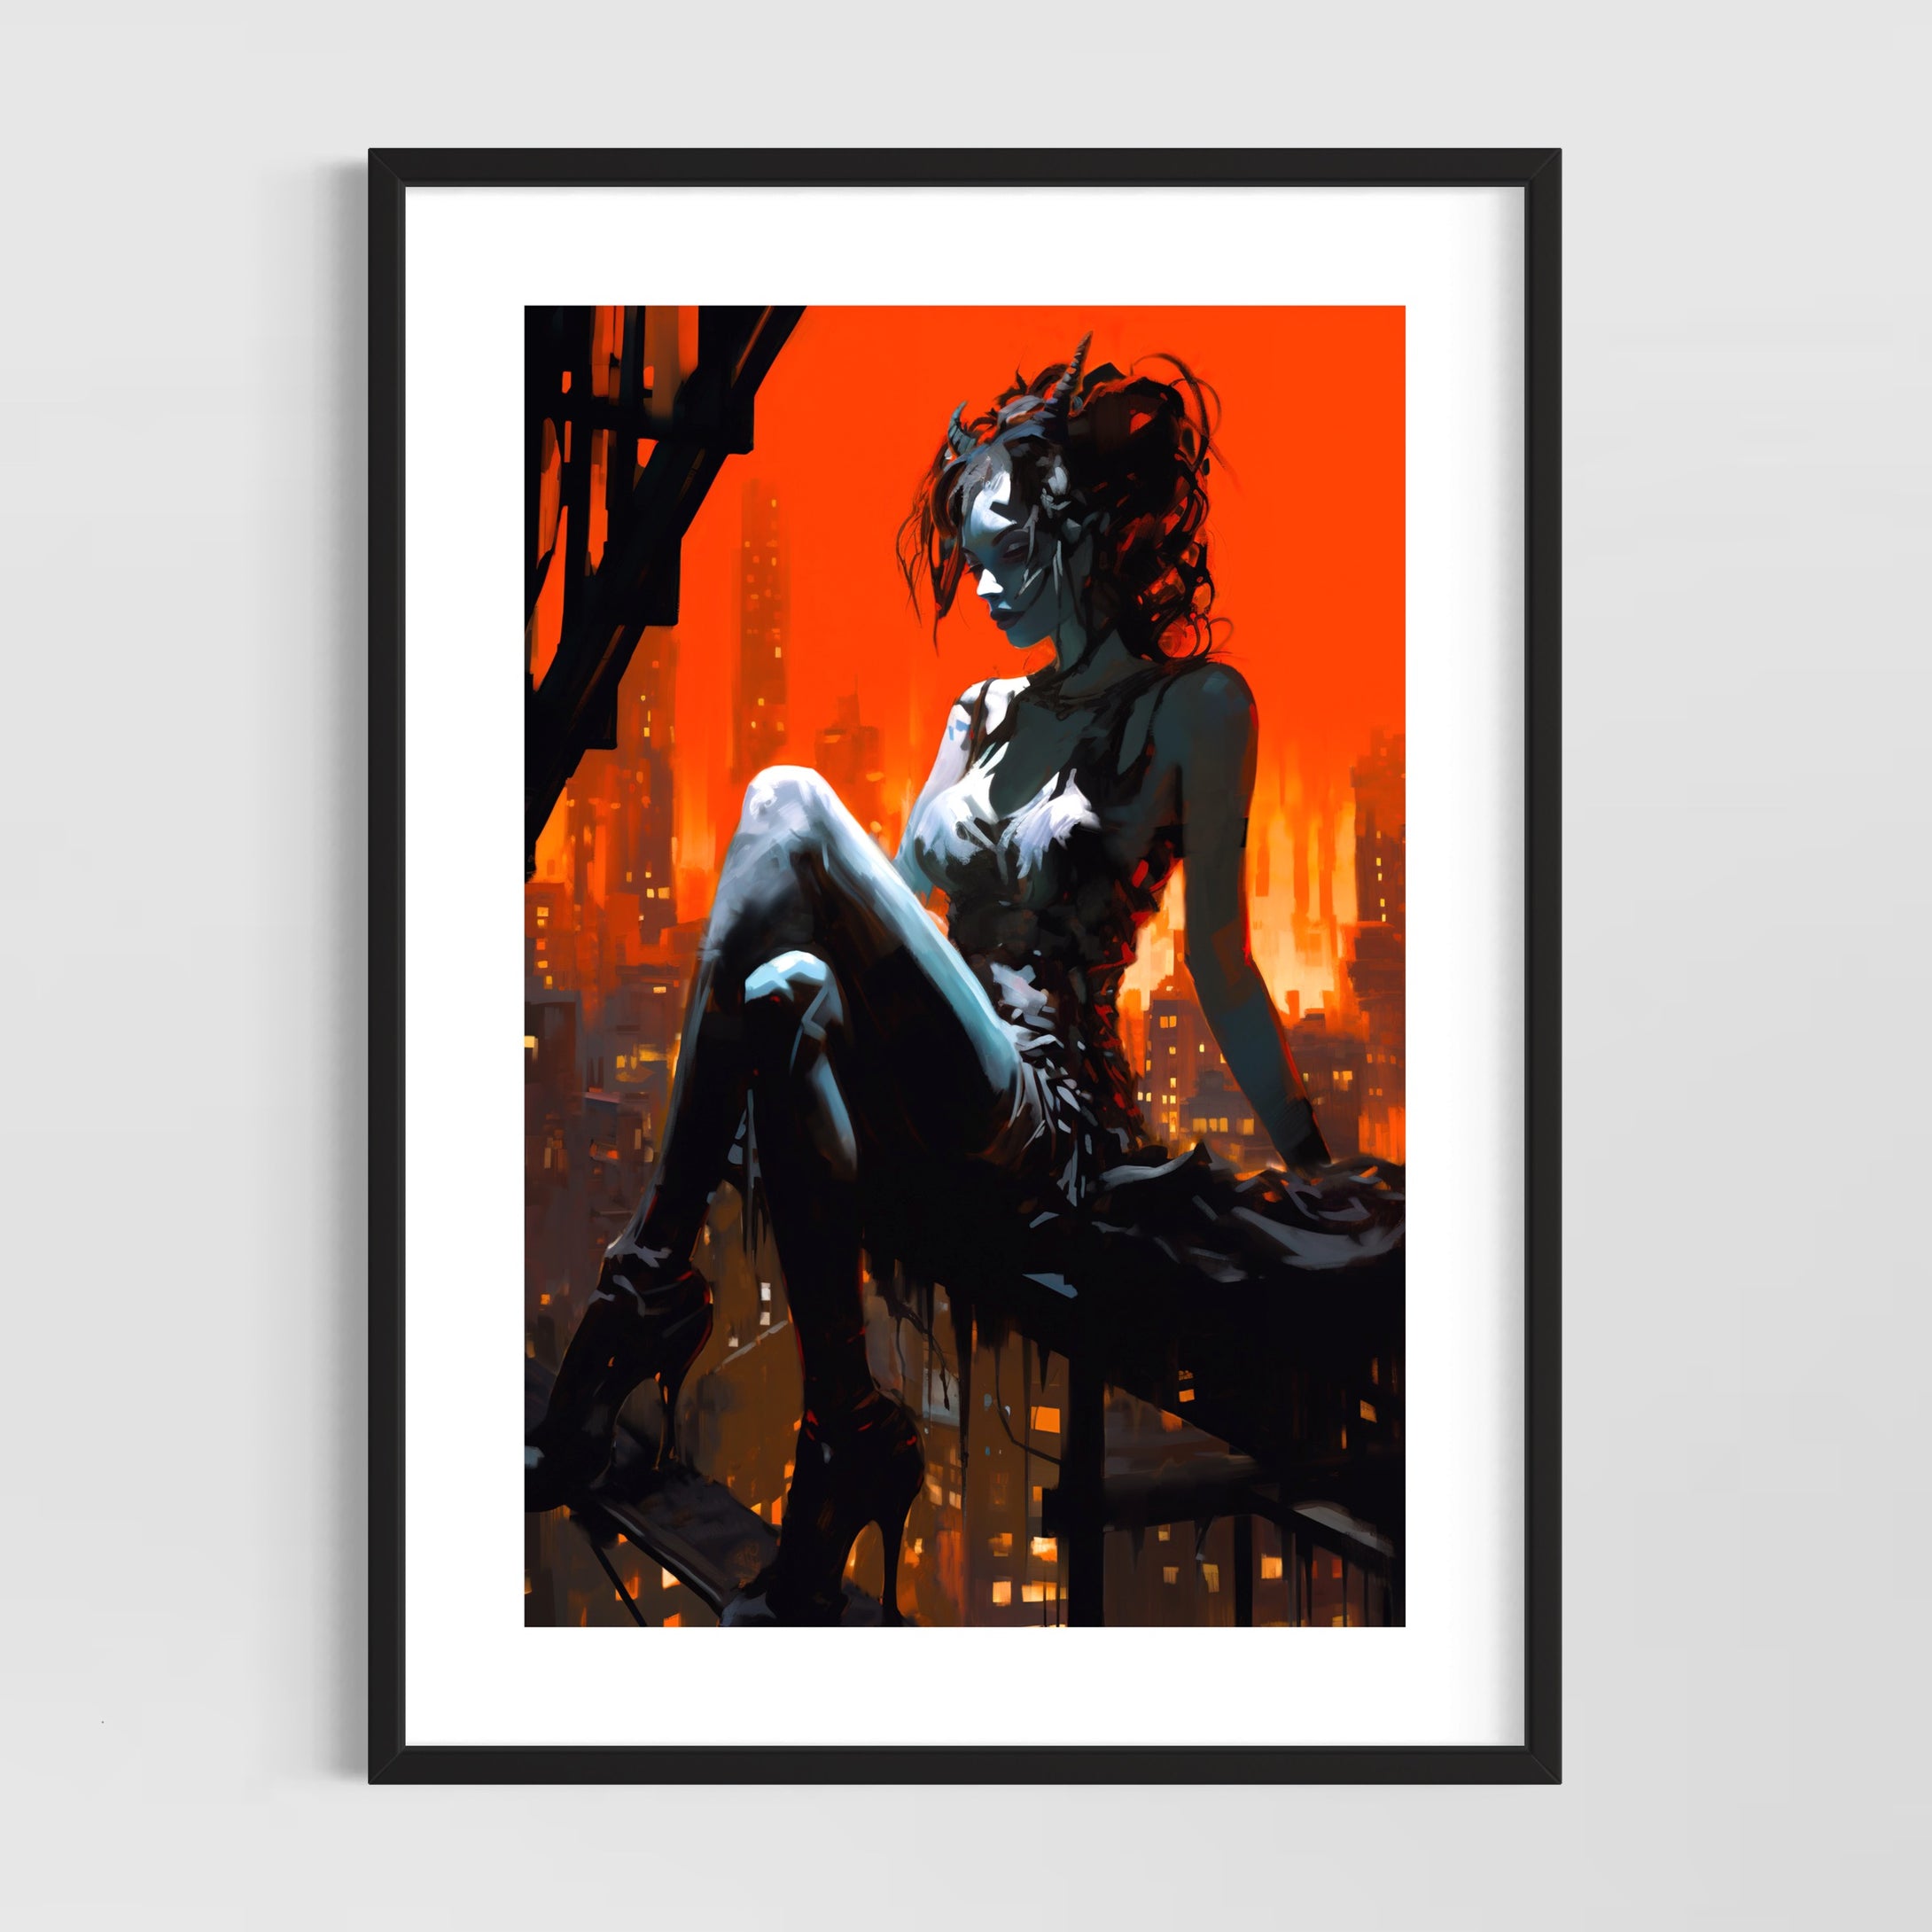 Witchy wall art - Moody painting - original fine art print